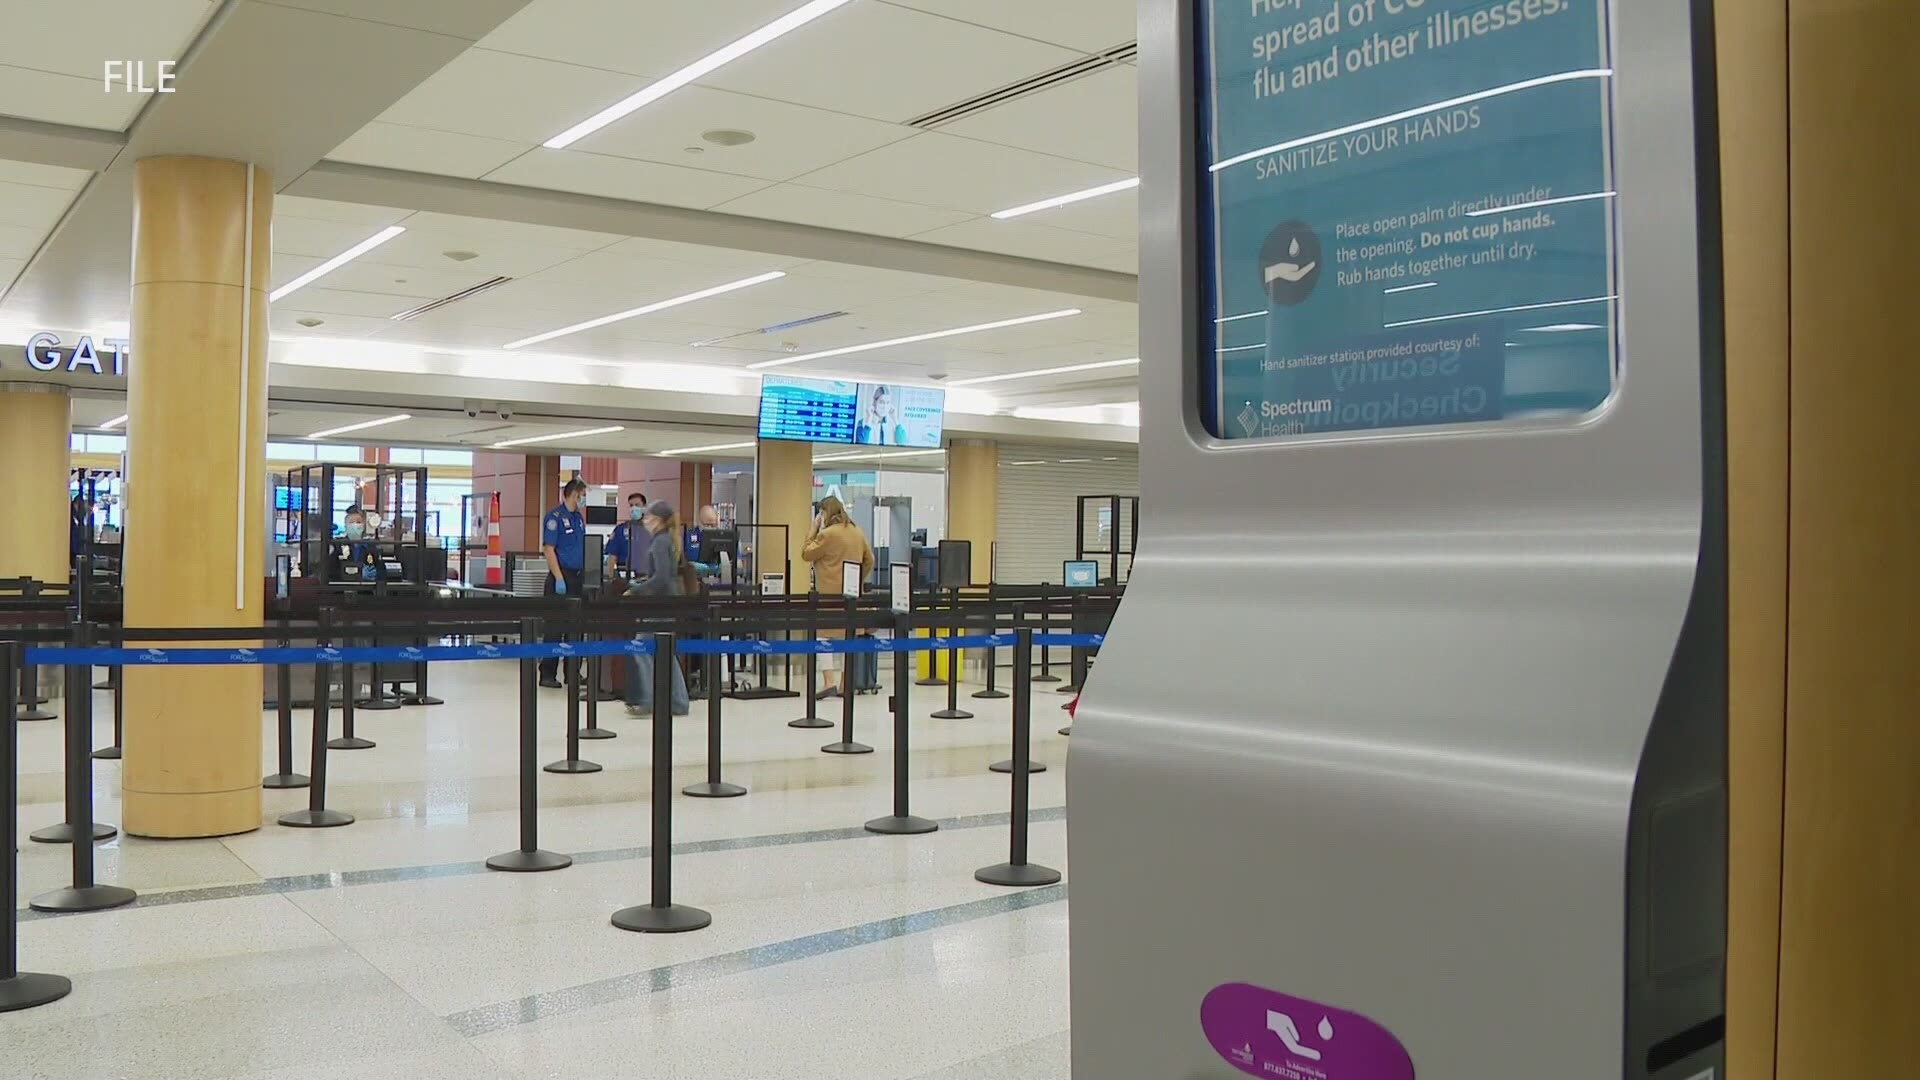 Gerald R. Ford International Airport anticipates seeing a "dramatic increase" in passengers during the next two weeks.